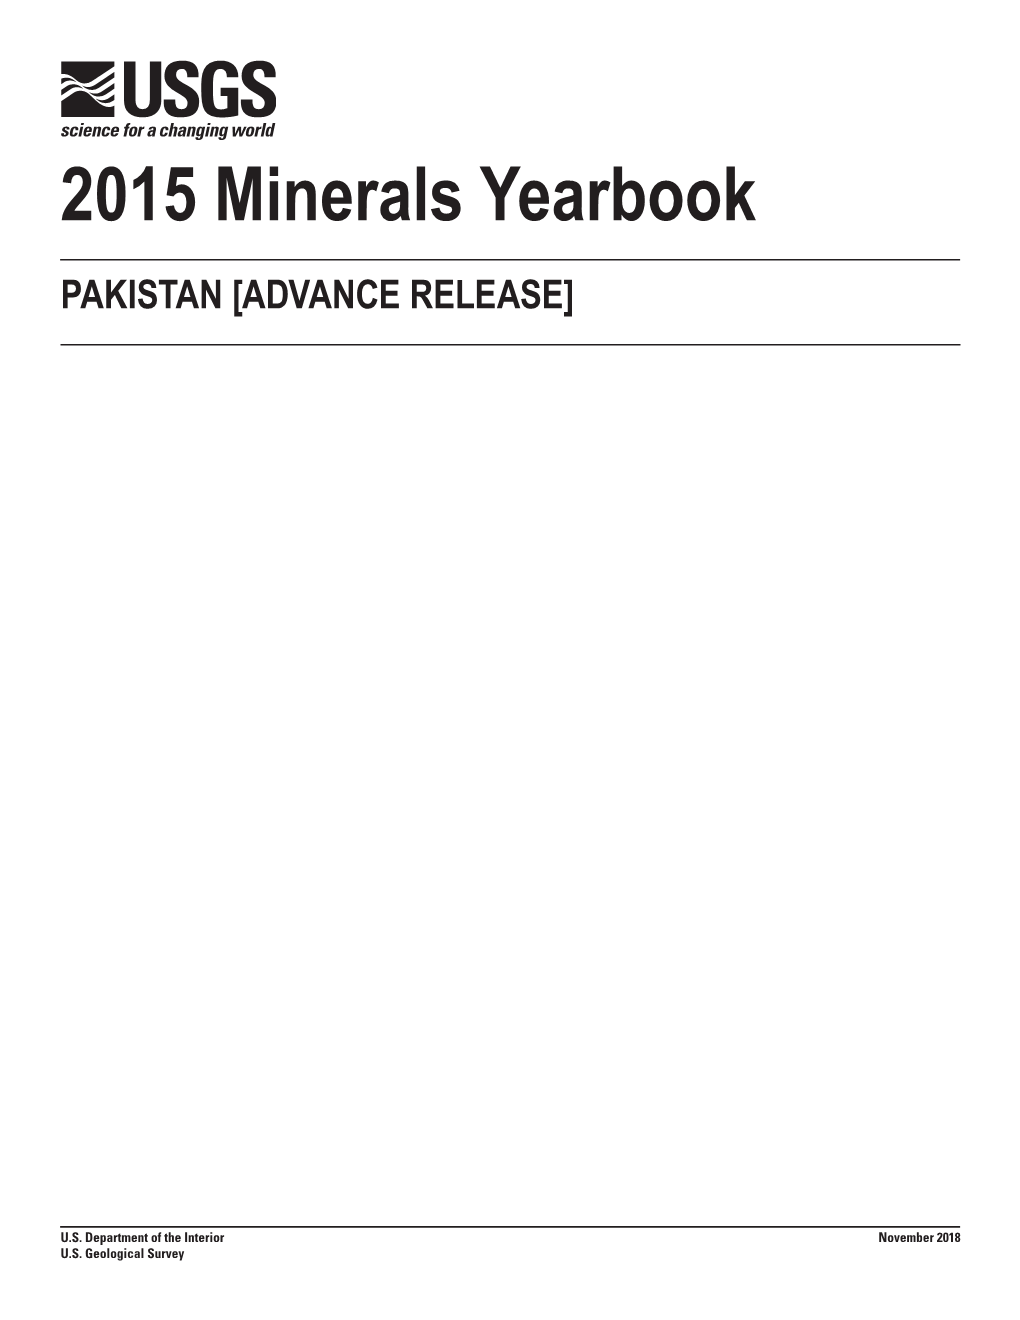 The Mineral Industry of Pakistan in 2015